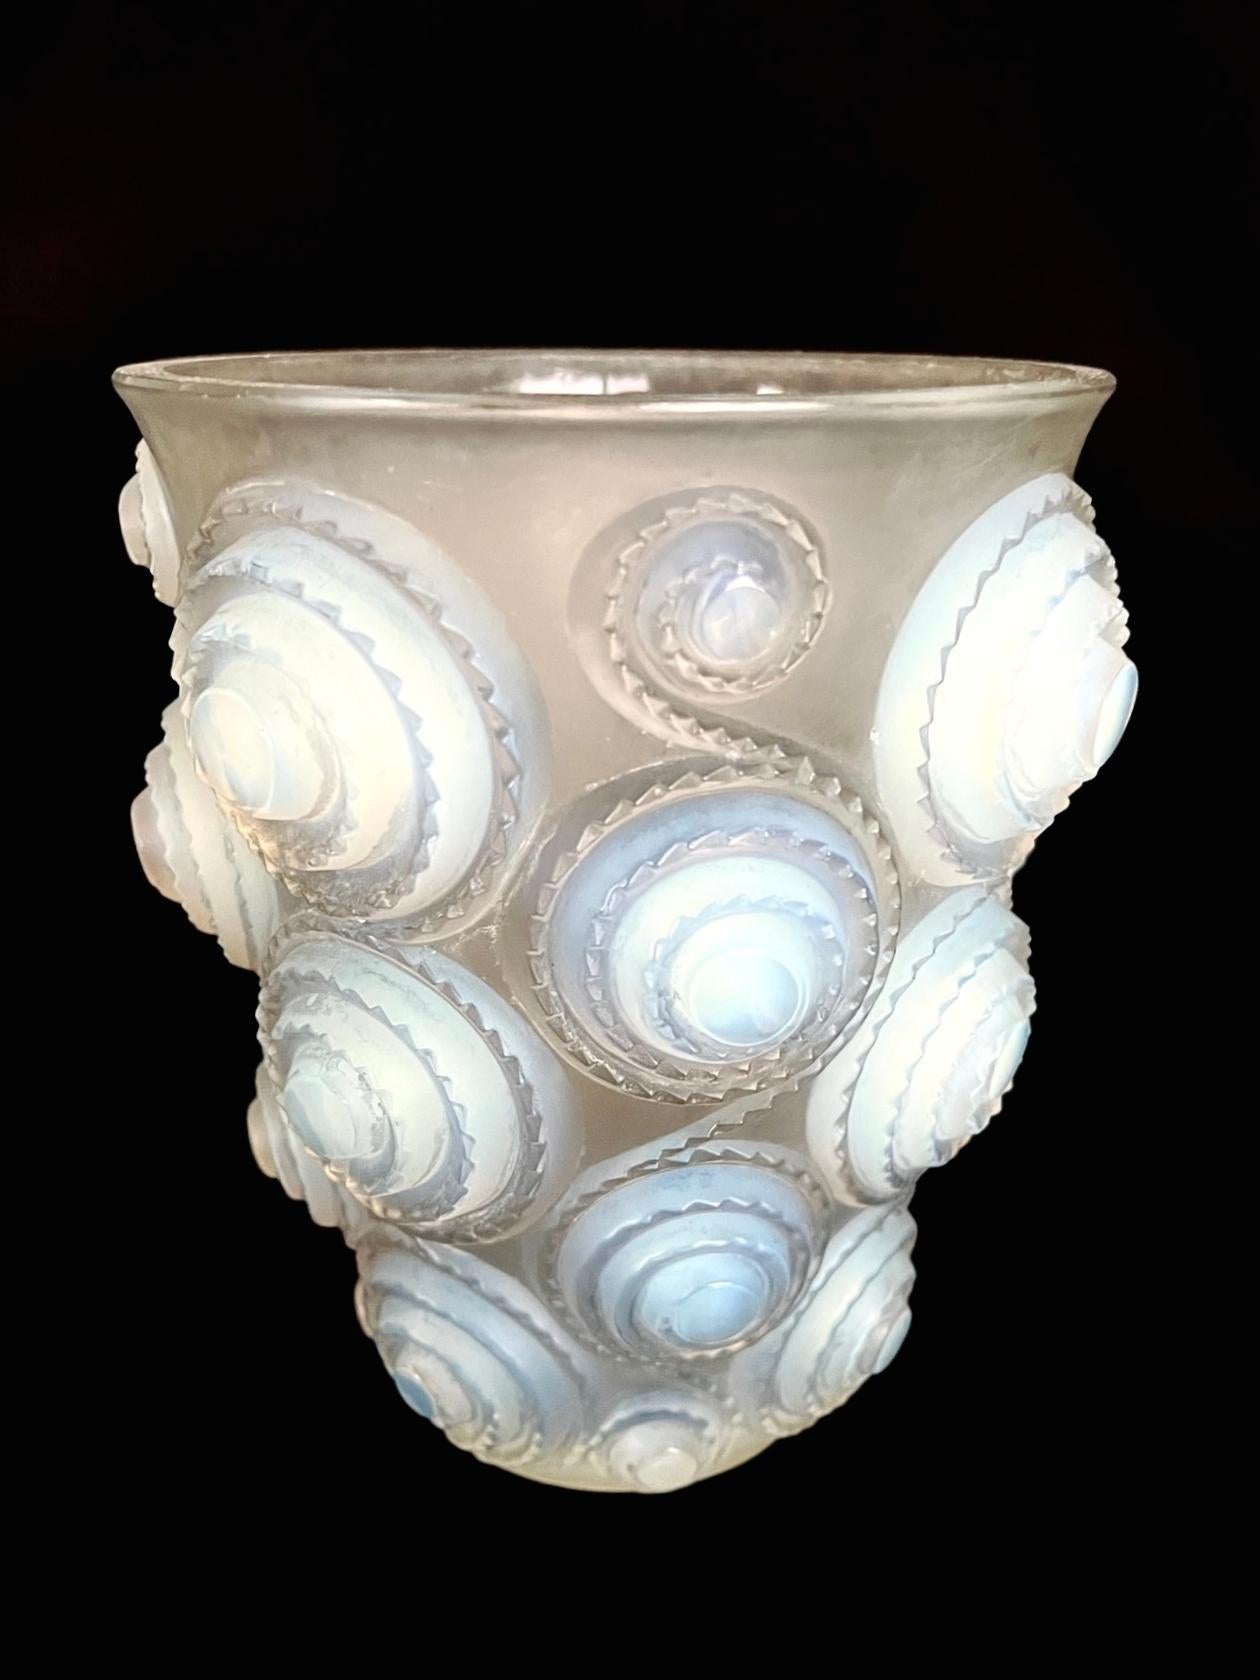 A striking Art Déco opalescent glass vase moulded in relief with a design of spirals with a serrated edge.
Acid-etched signature 